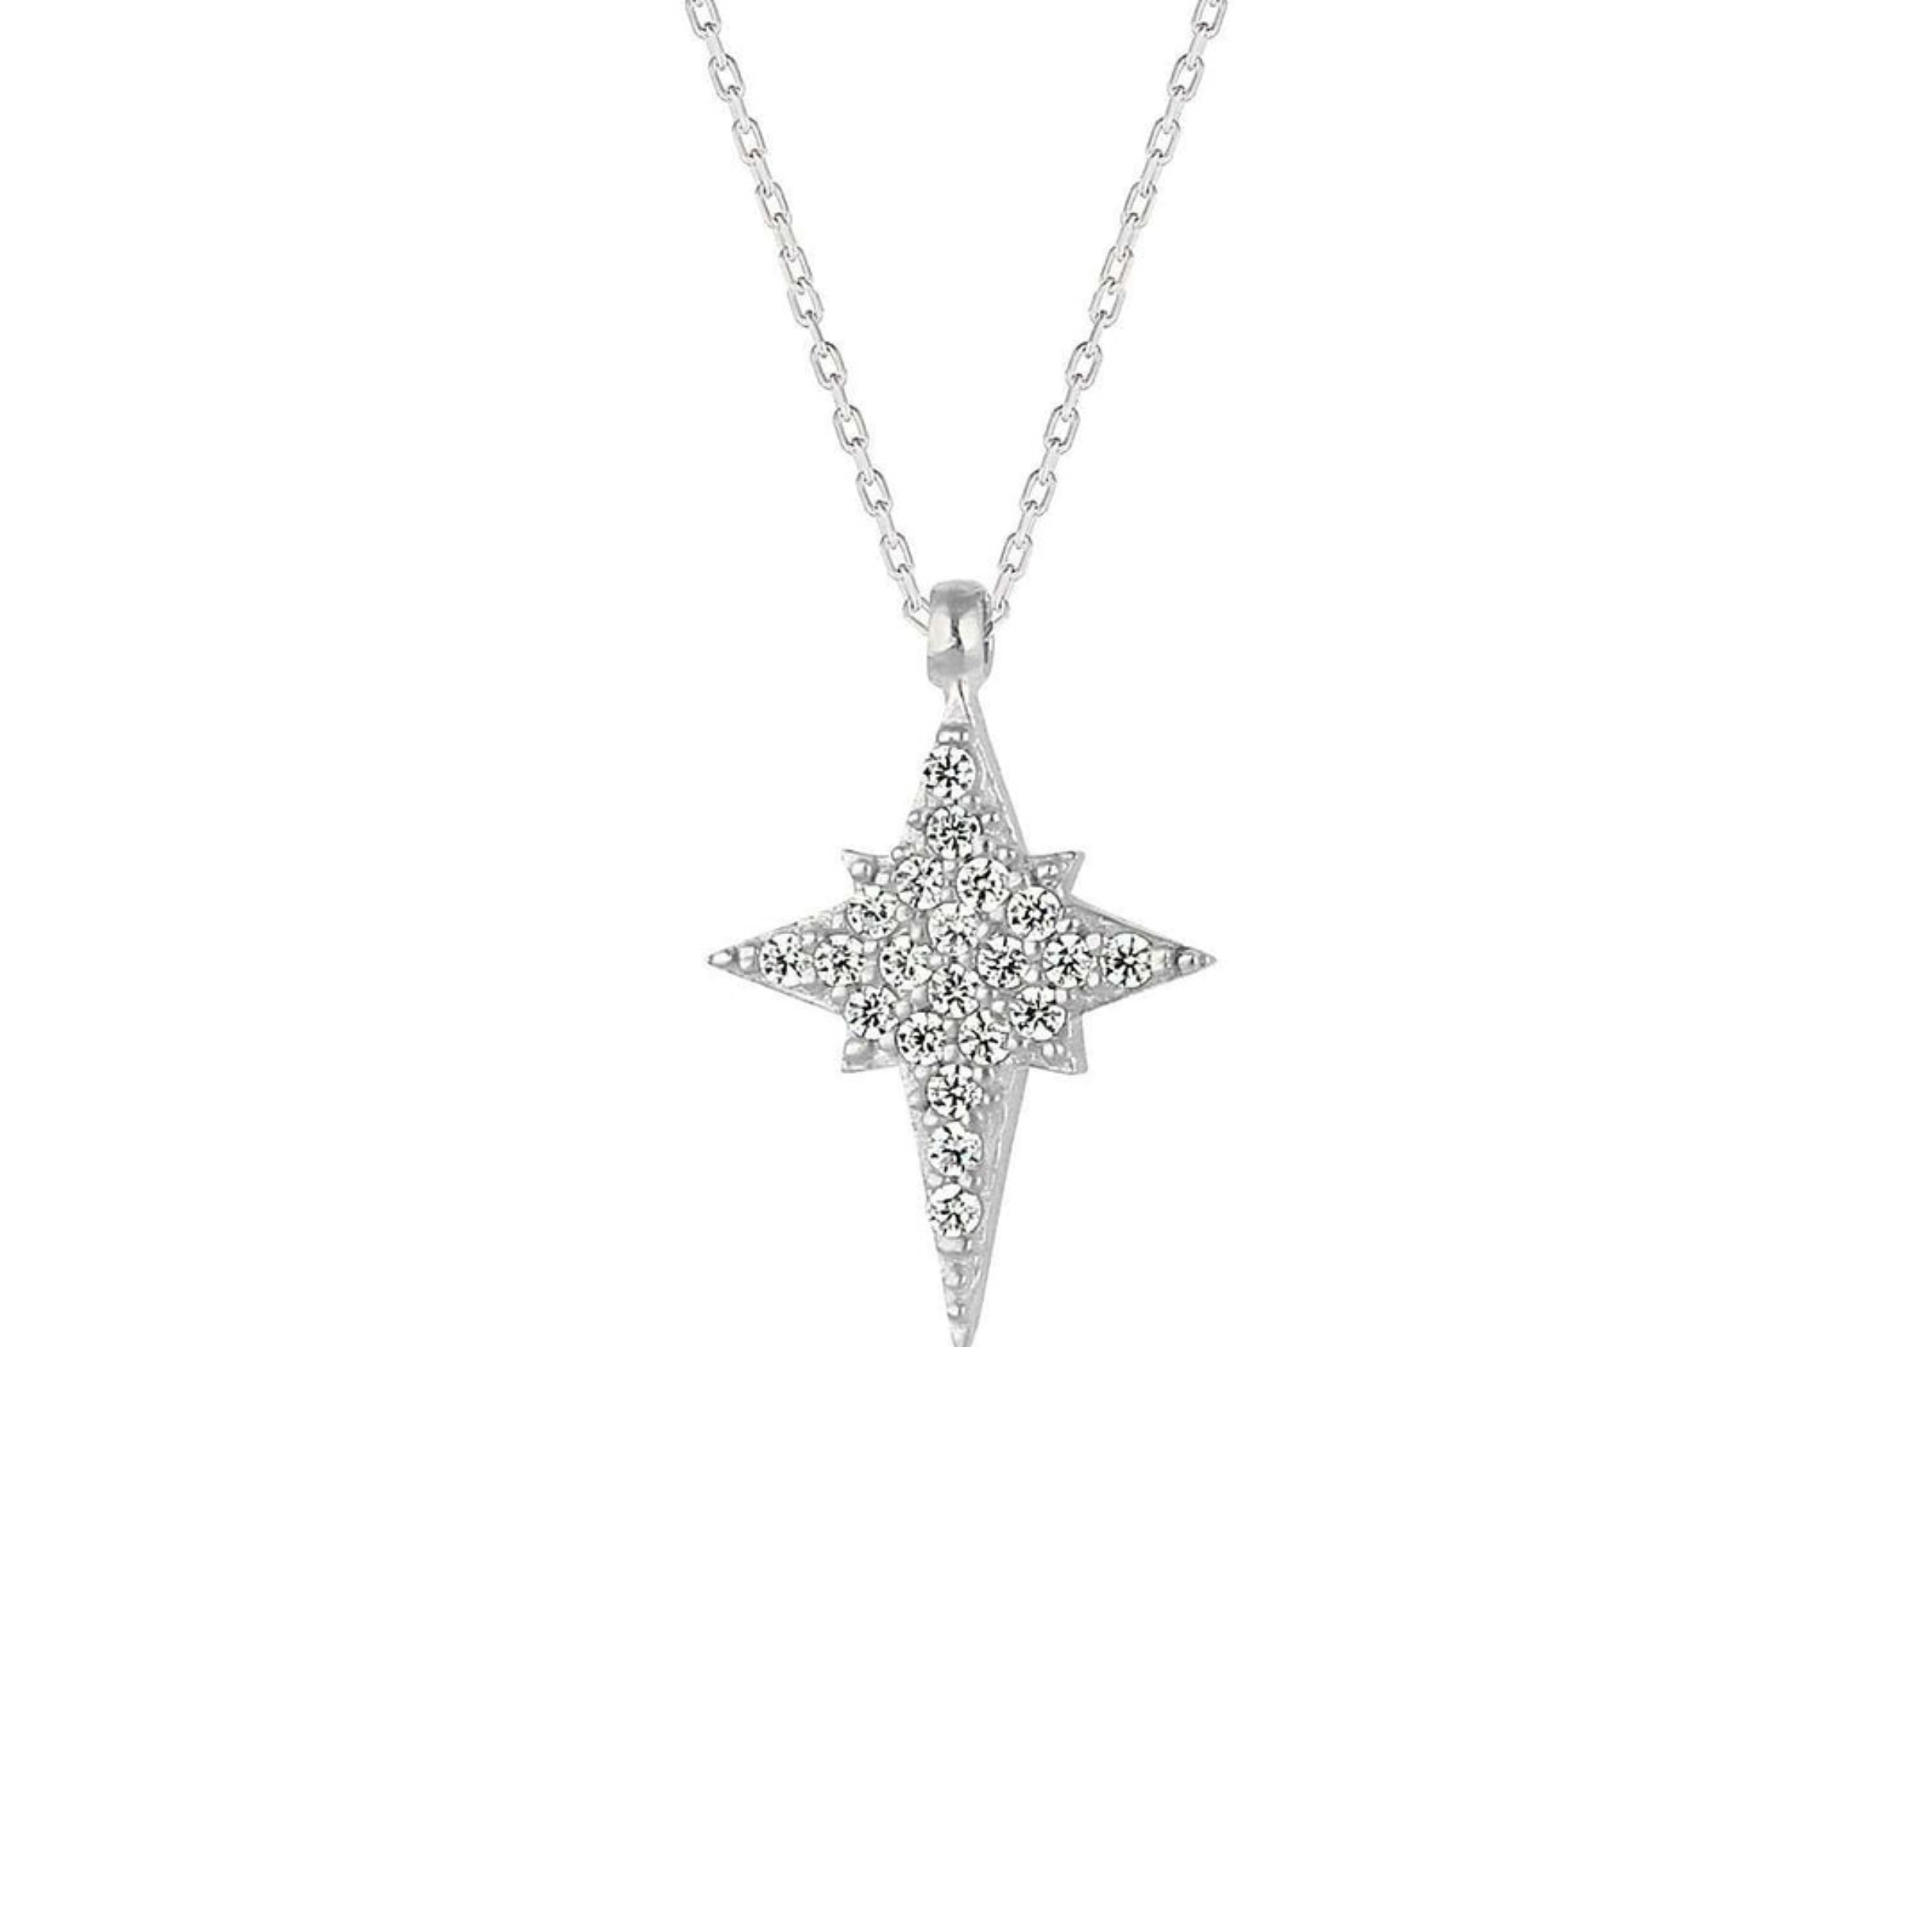 Northern Star Polaris Sterling Silver Necklace